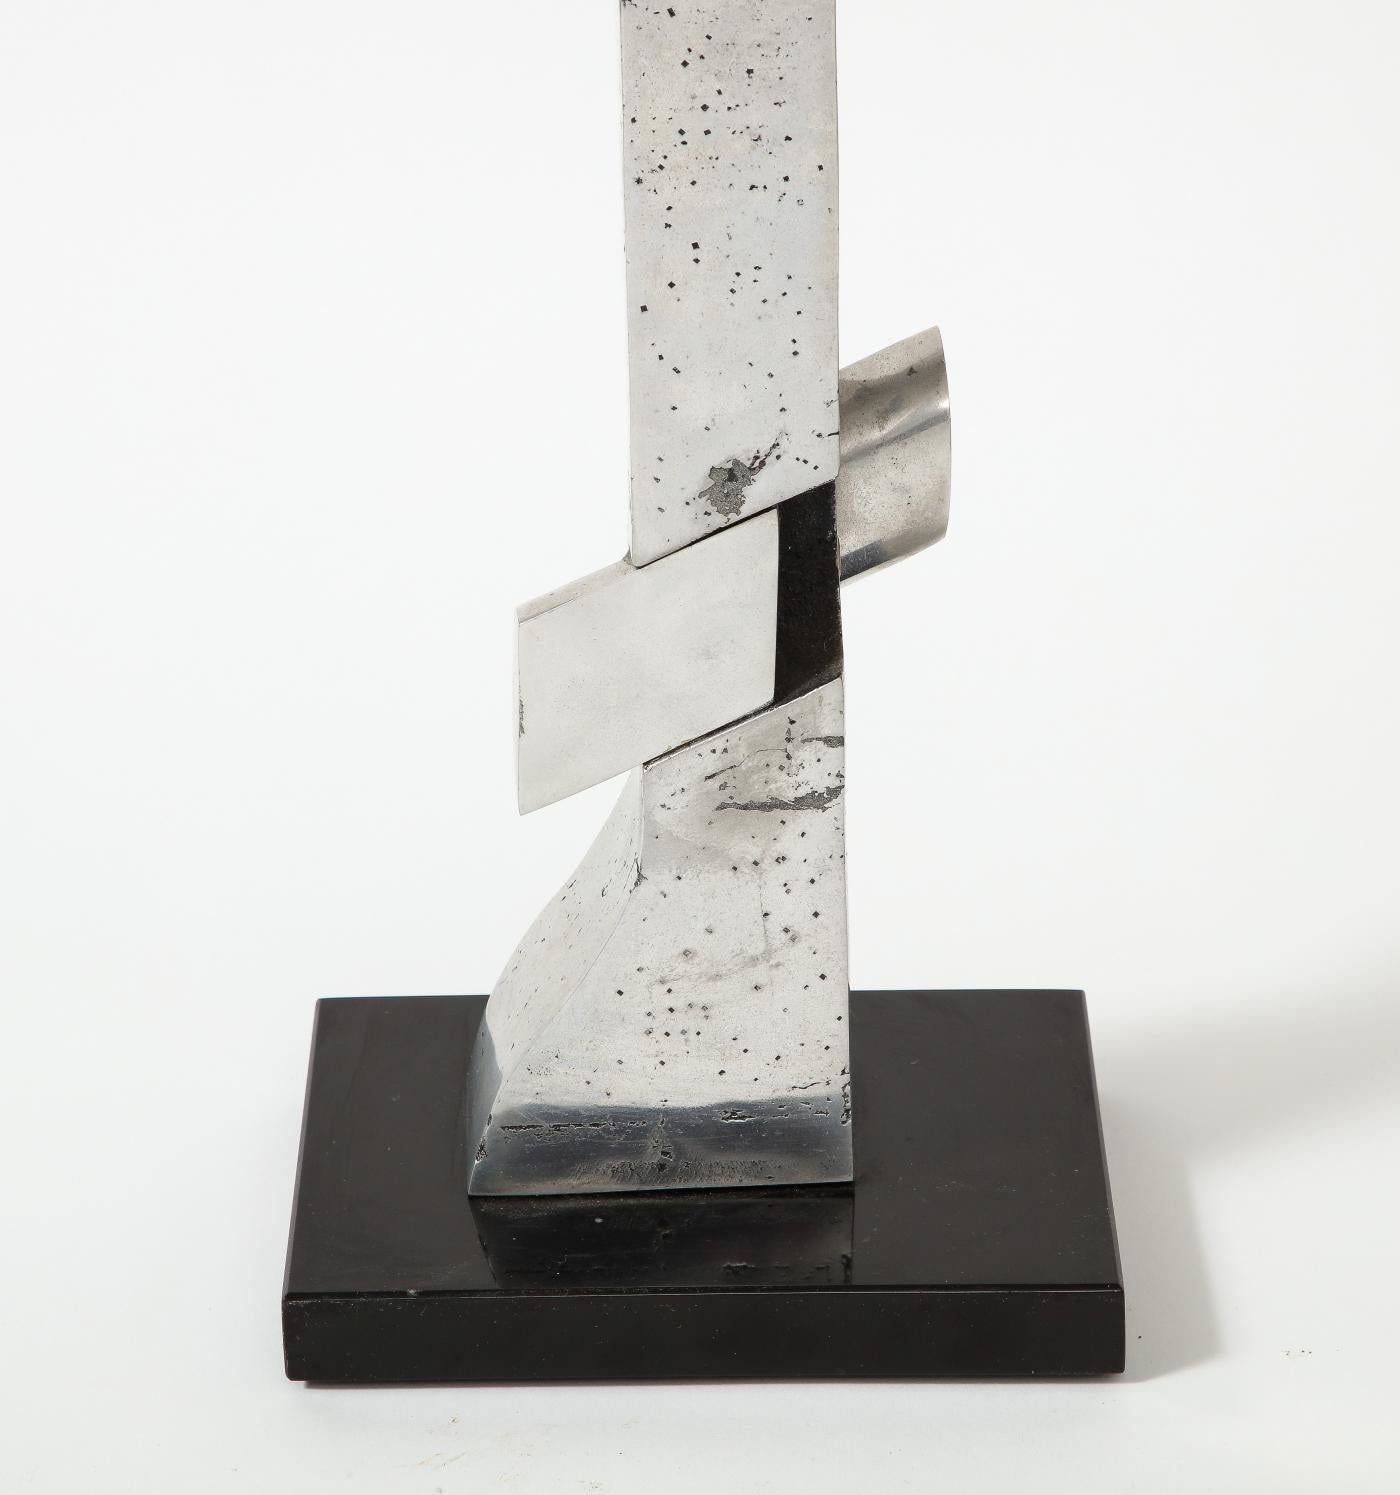 Abstract Chromed Steel Sculpture by Thibaud Weisz, c. 1950 For Sale 6